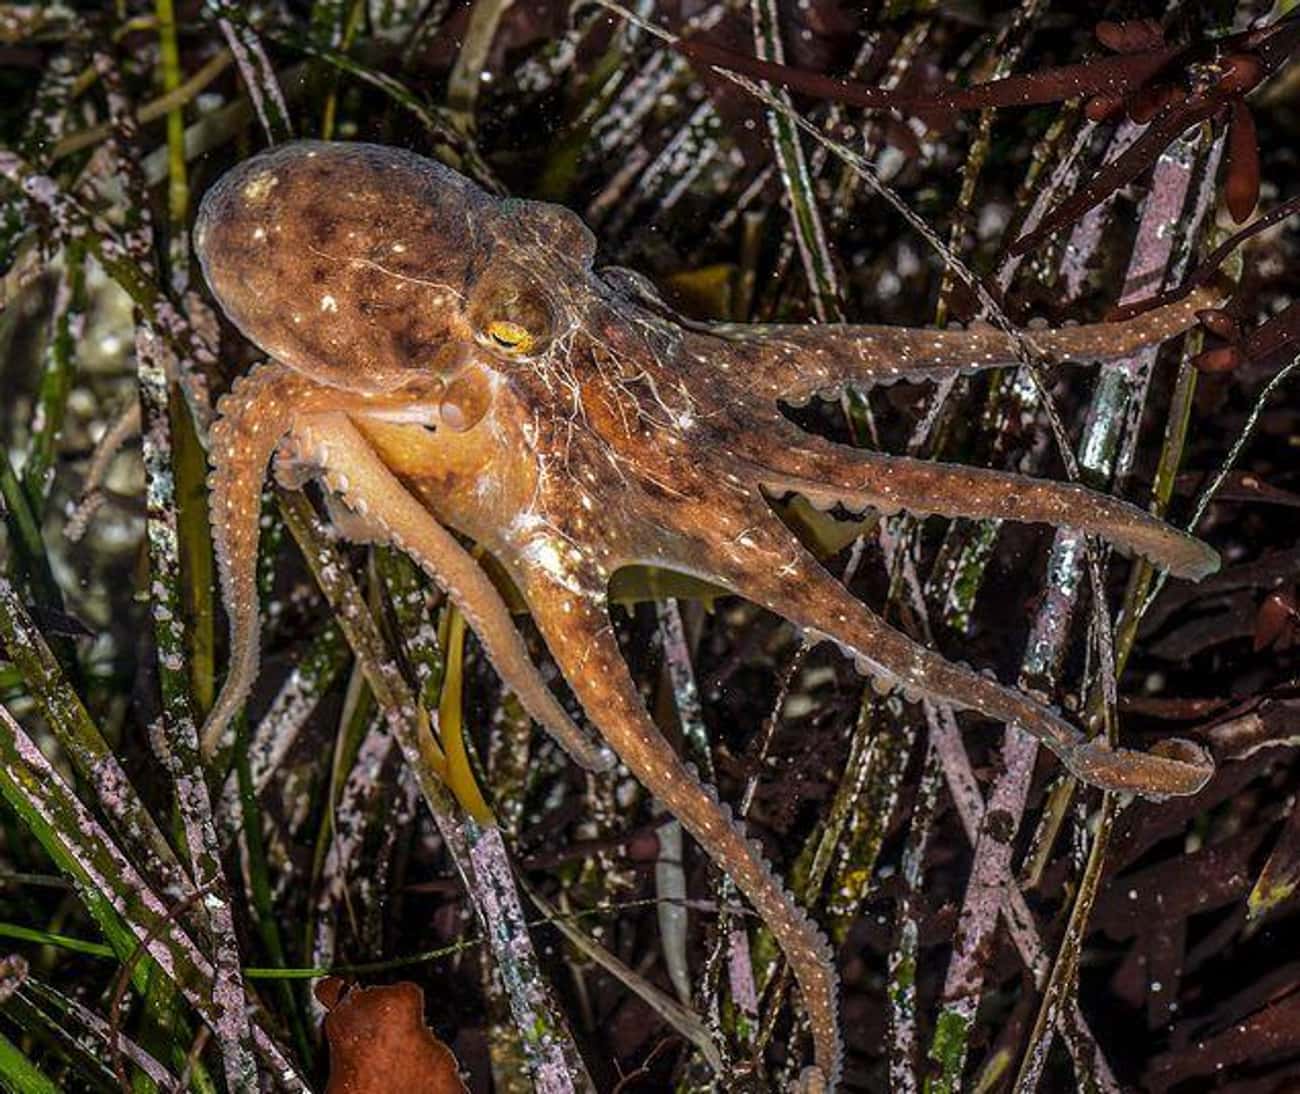 Octopuses Lose Their Minds After Doing It, Then Pass Away